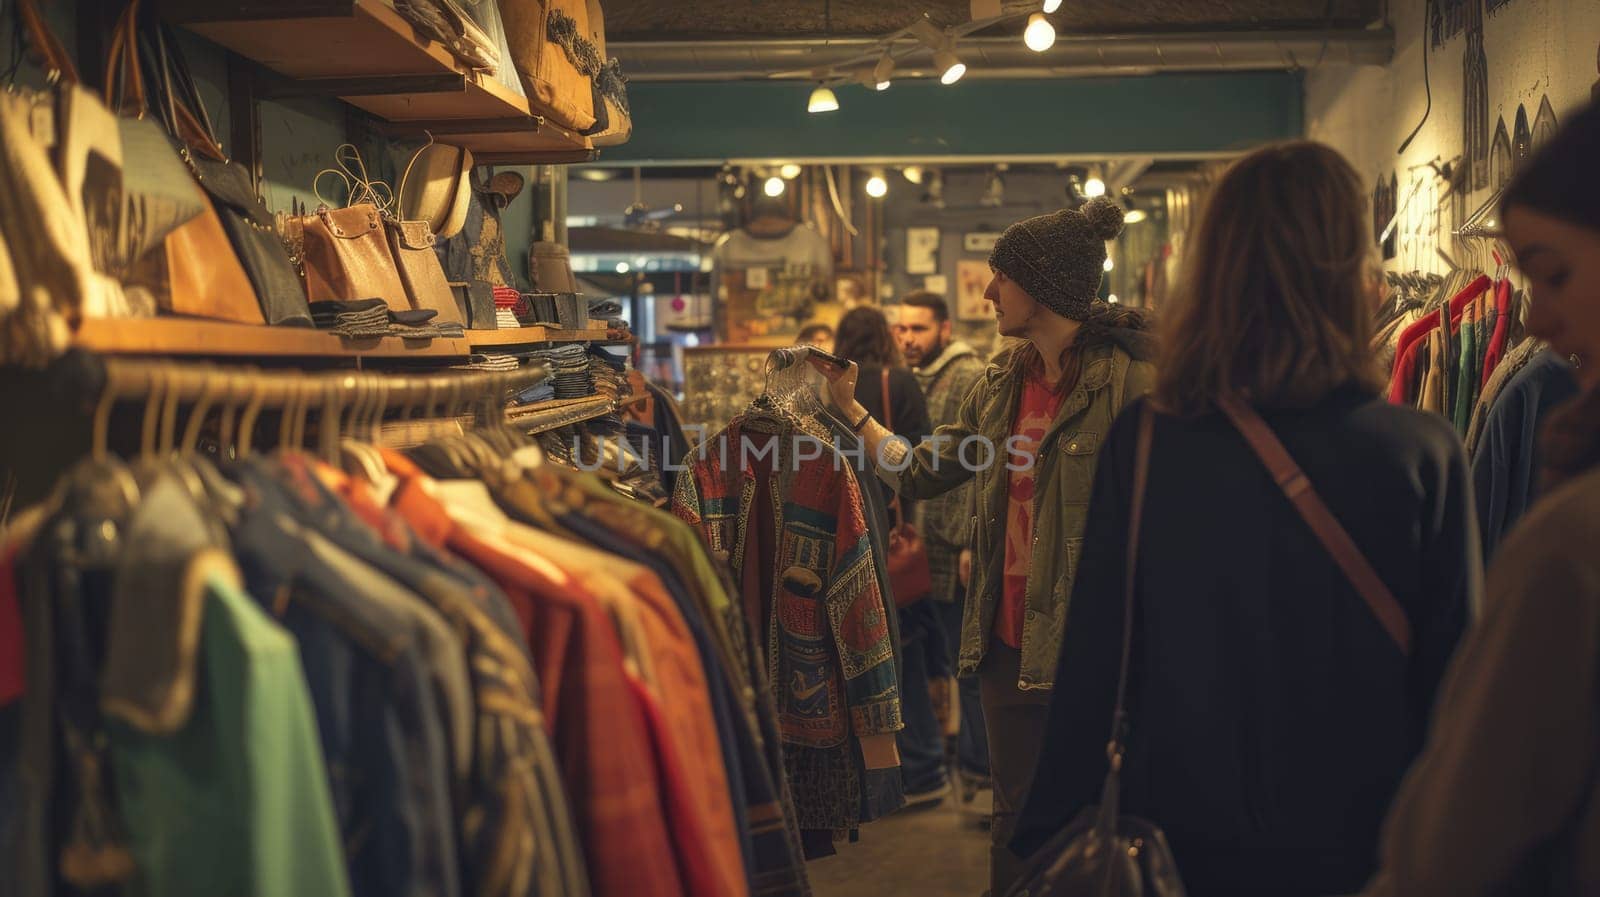 A crowd of customers is touring a retail building in the city's clothing marketplace. AIG41